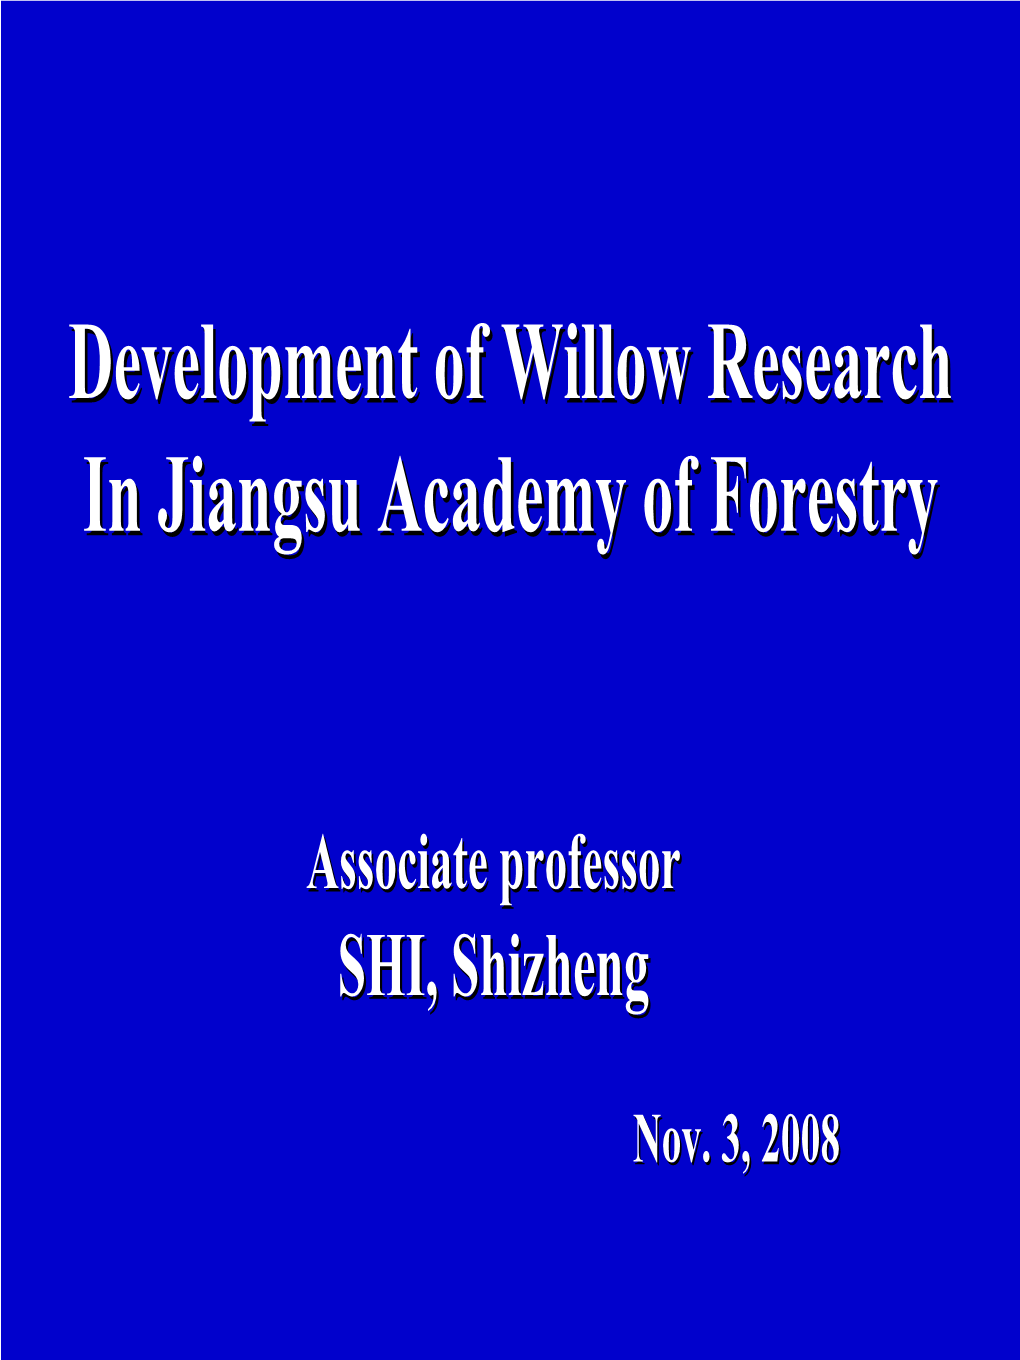 Development of Willow Research in Jiangsu Academy of Forestry